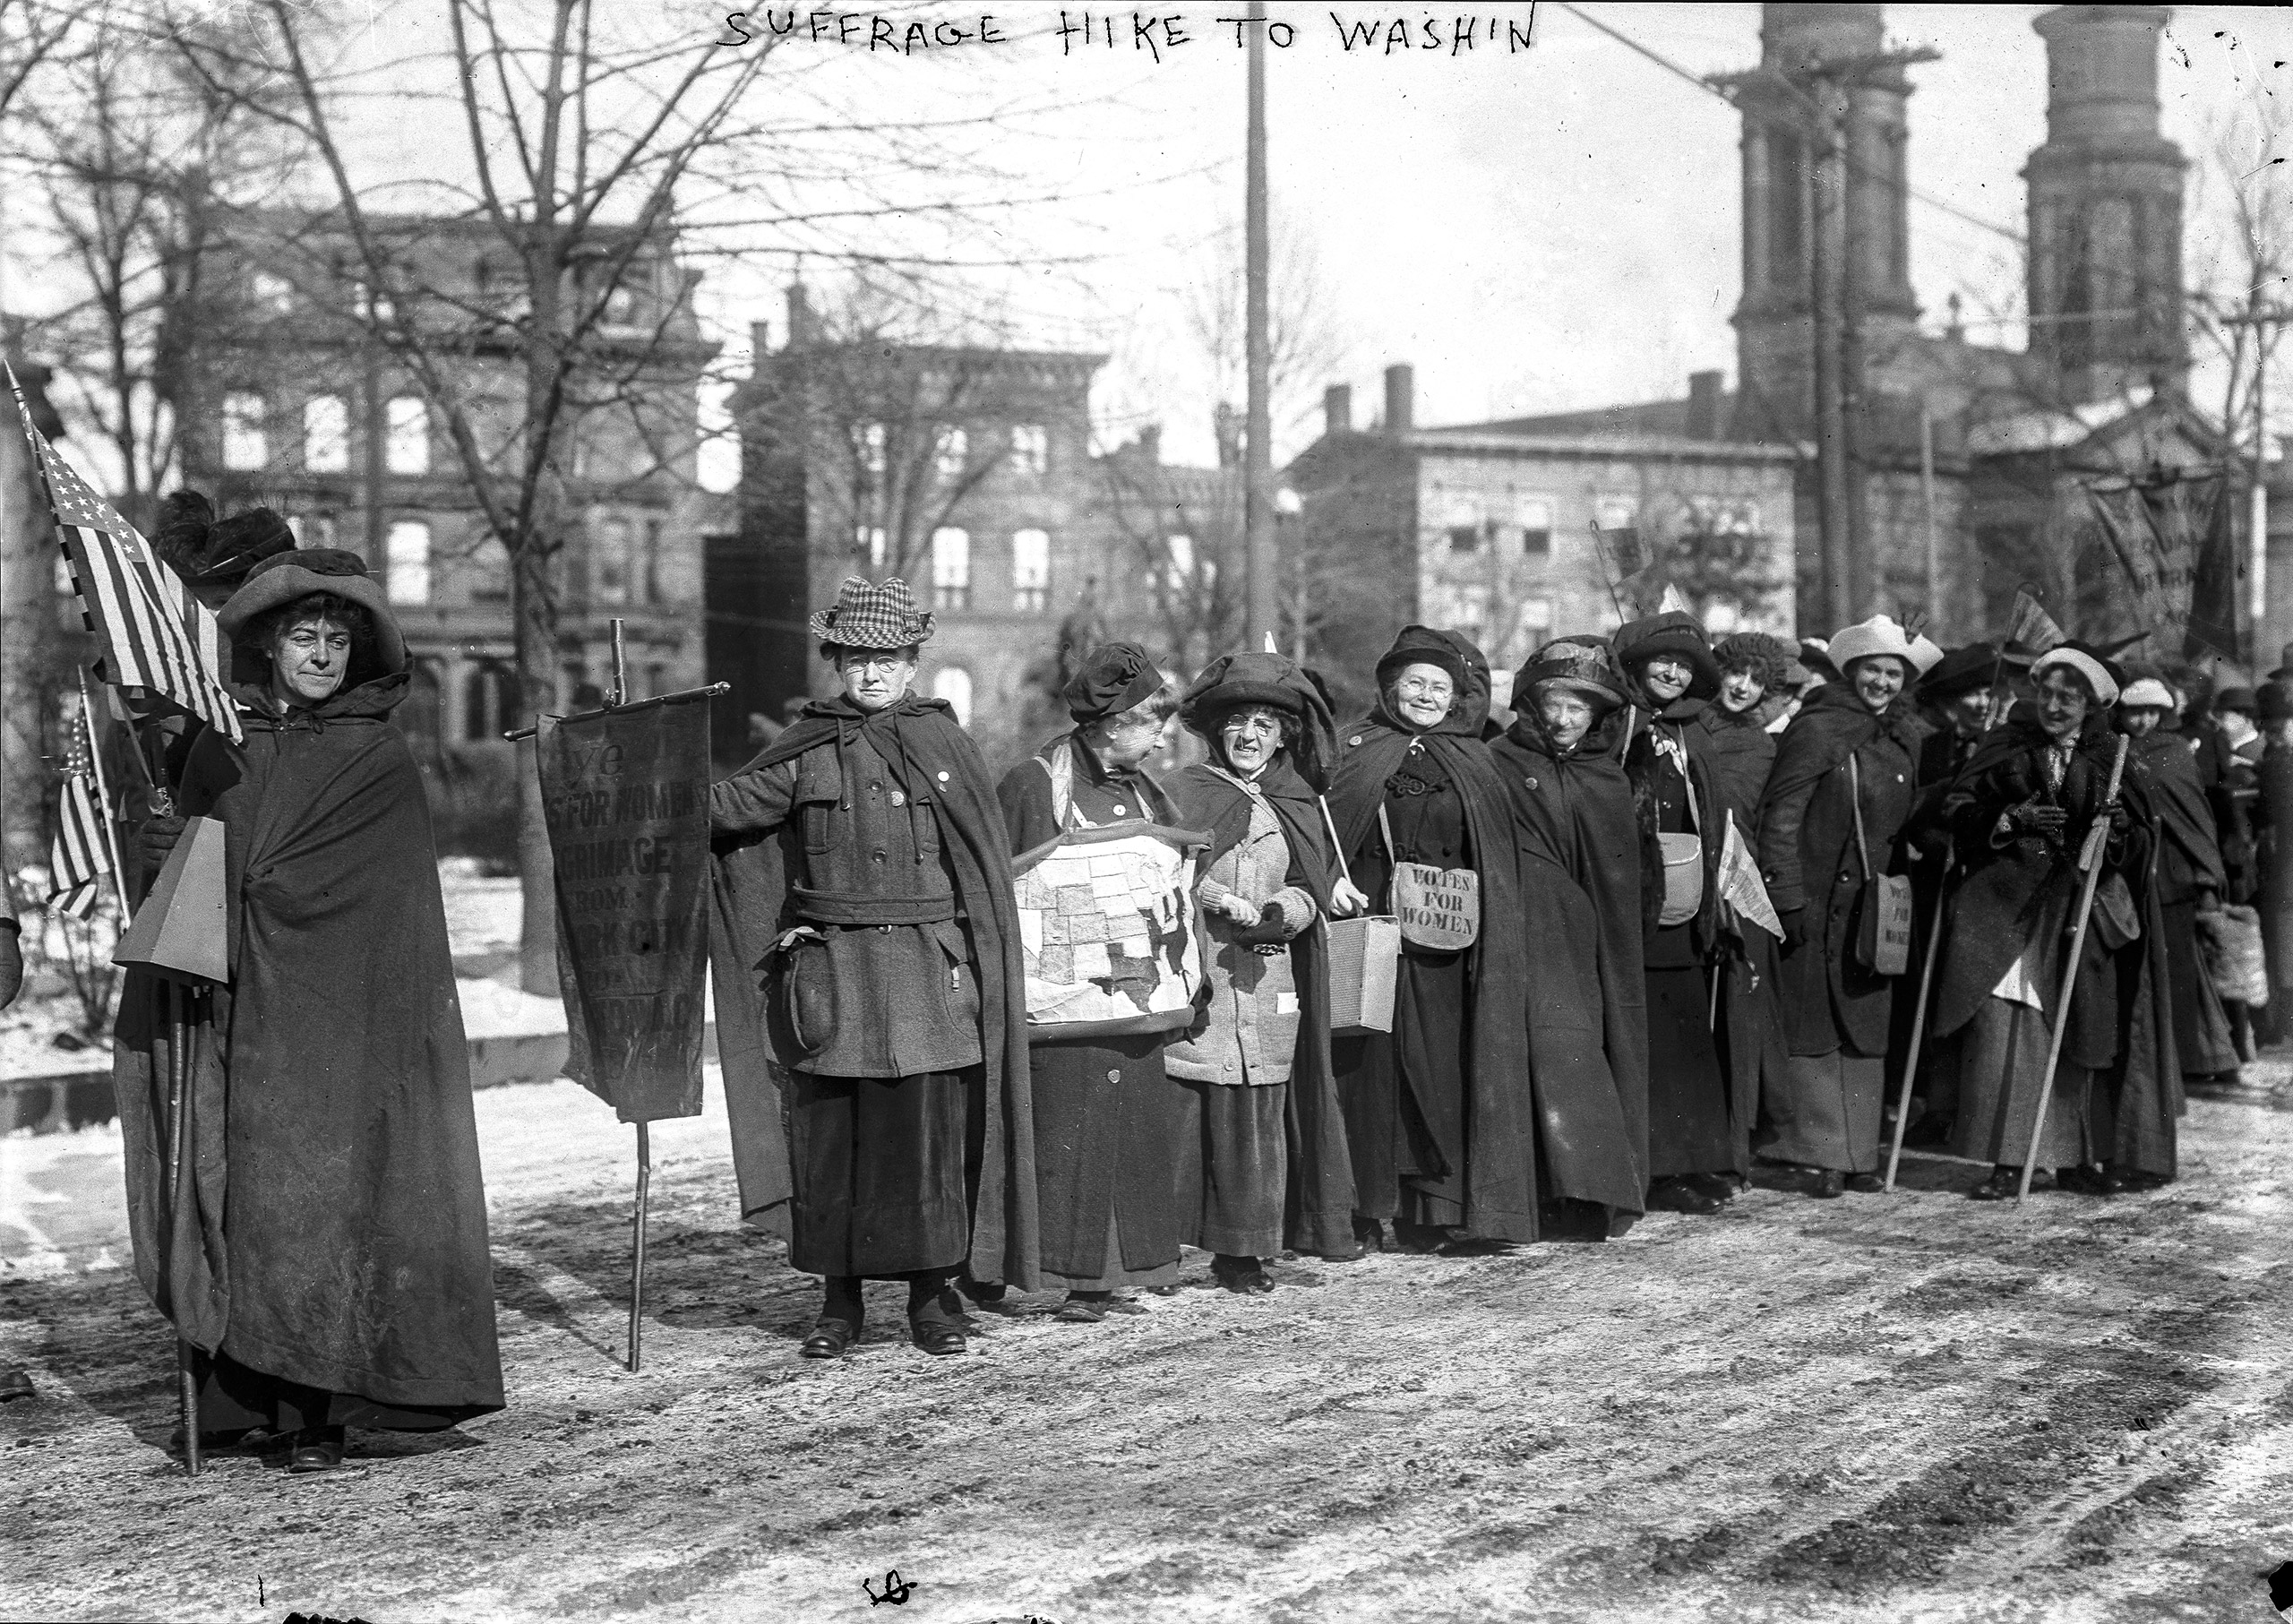 Suffrage hikers who took part in the suffrage hike from New York City to Washington, D.C. which joined the Mar. 3, 1913 National American Woman Suffrage Association parade.